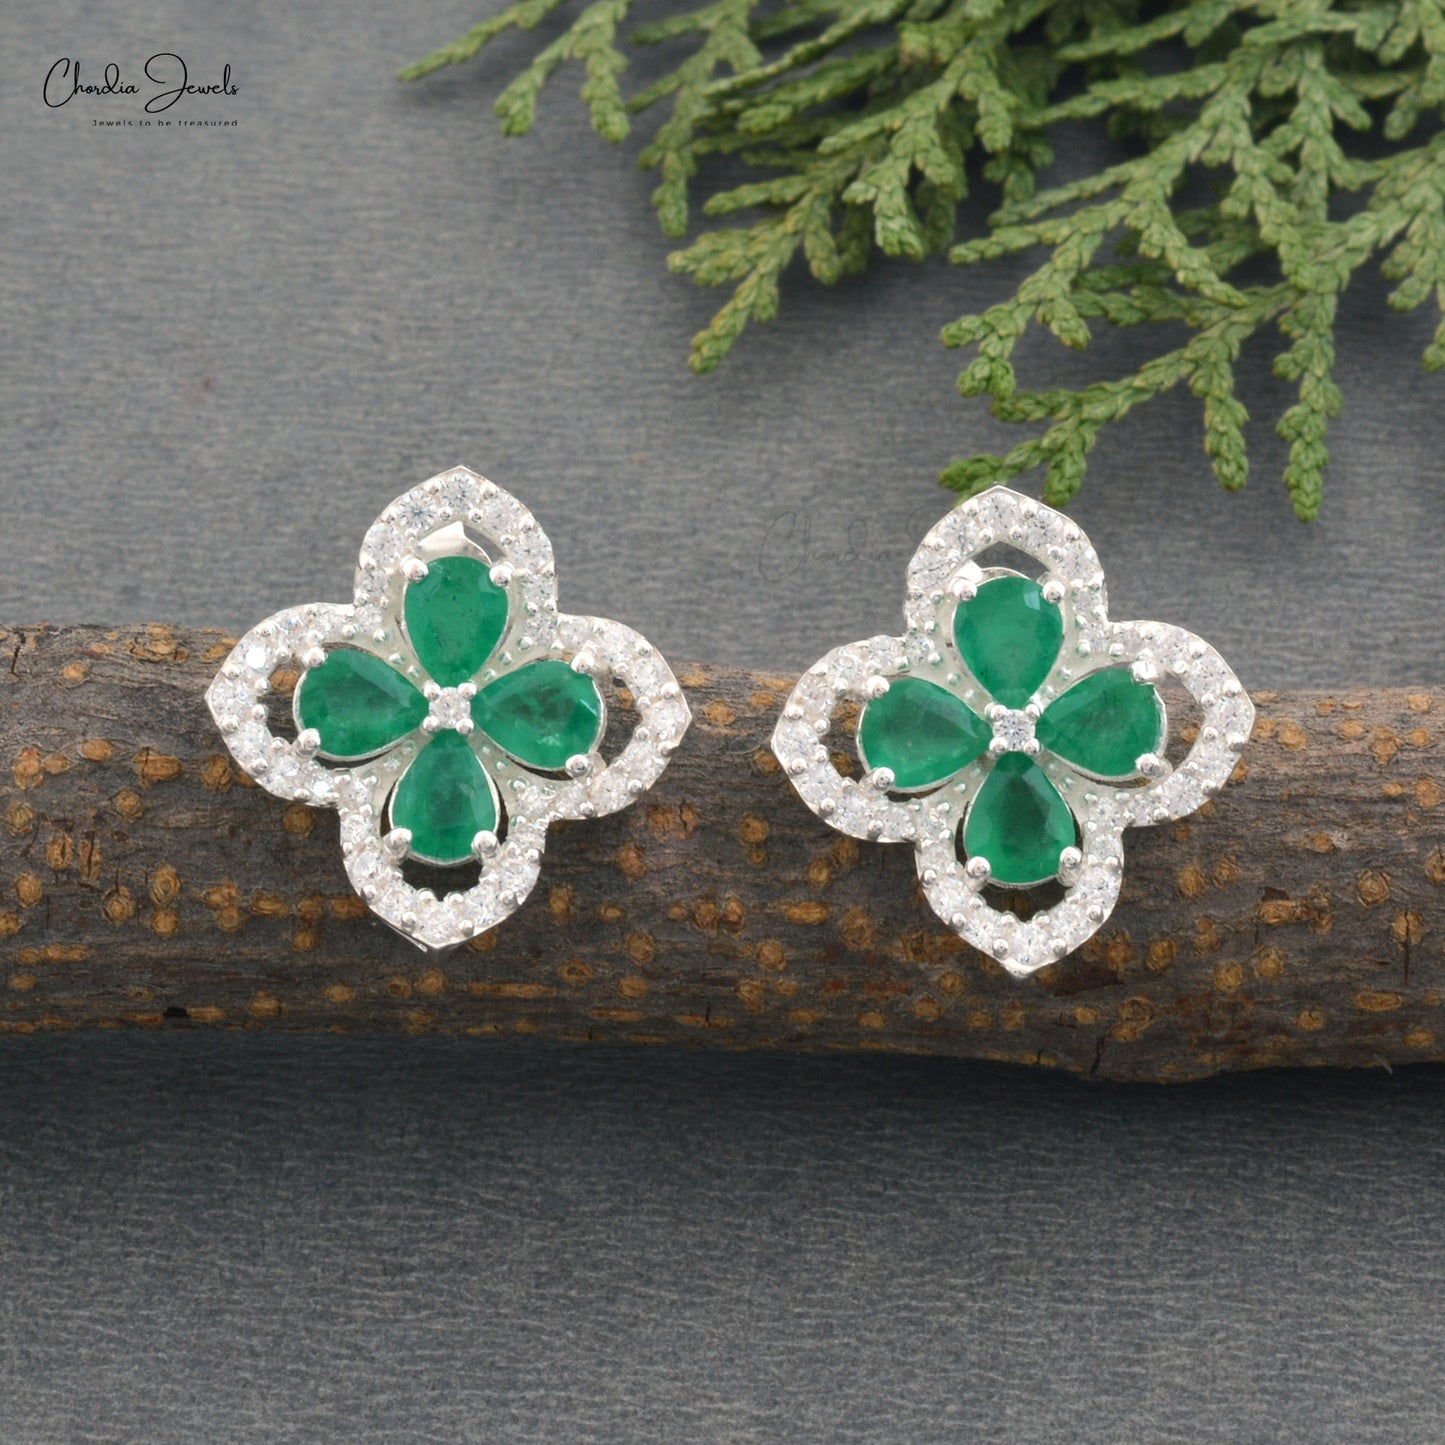 Top Quality Jewelry At Wholesale Price 925 Sterling Silver Zambian Emerald and Cubic Zircon Floral Stud Earrings